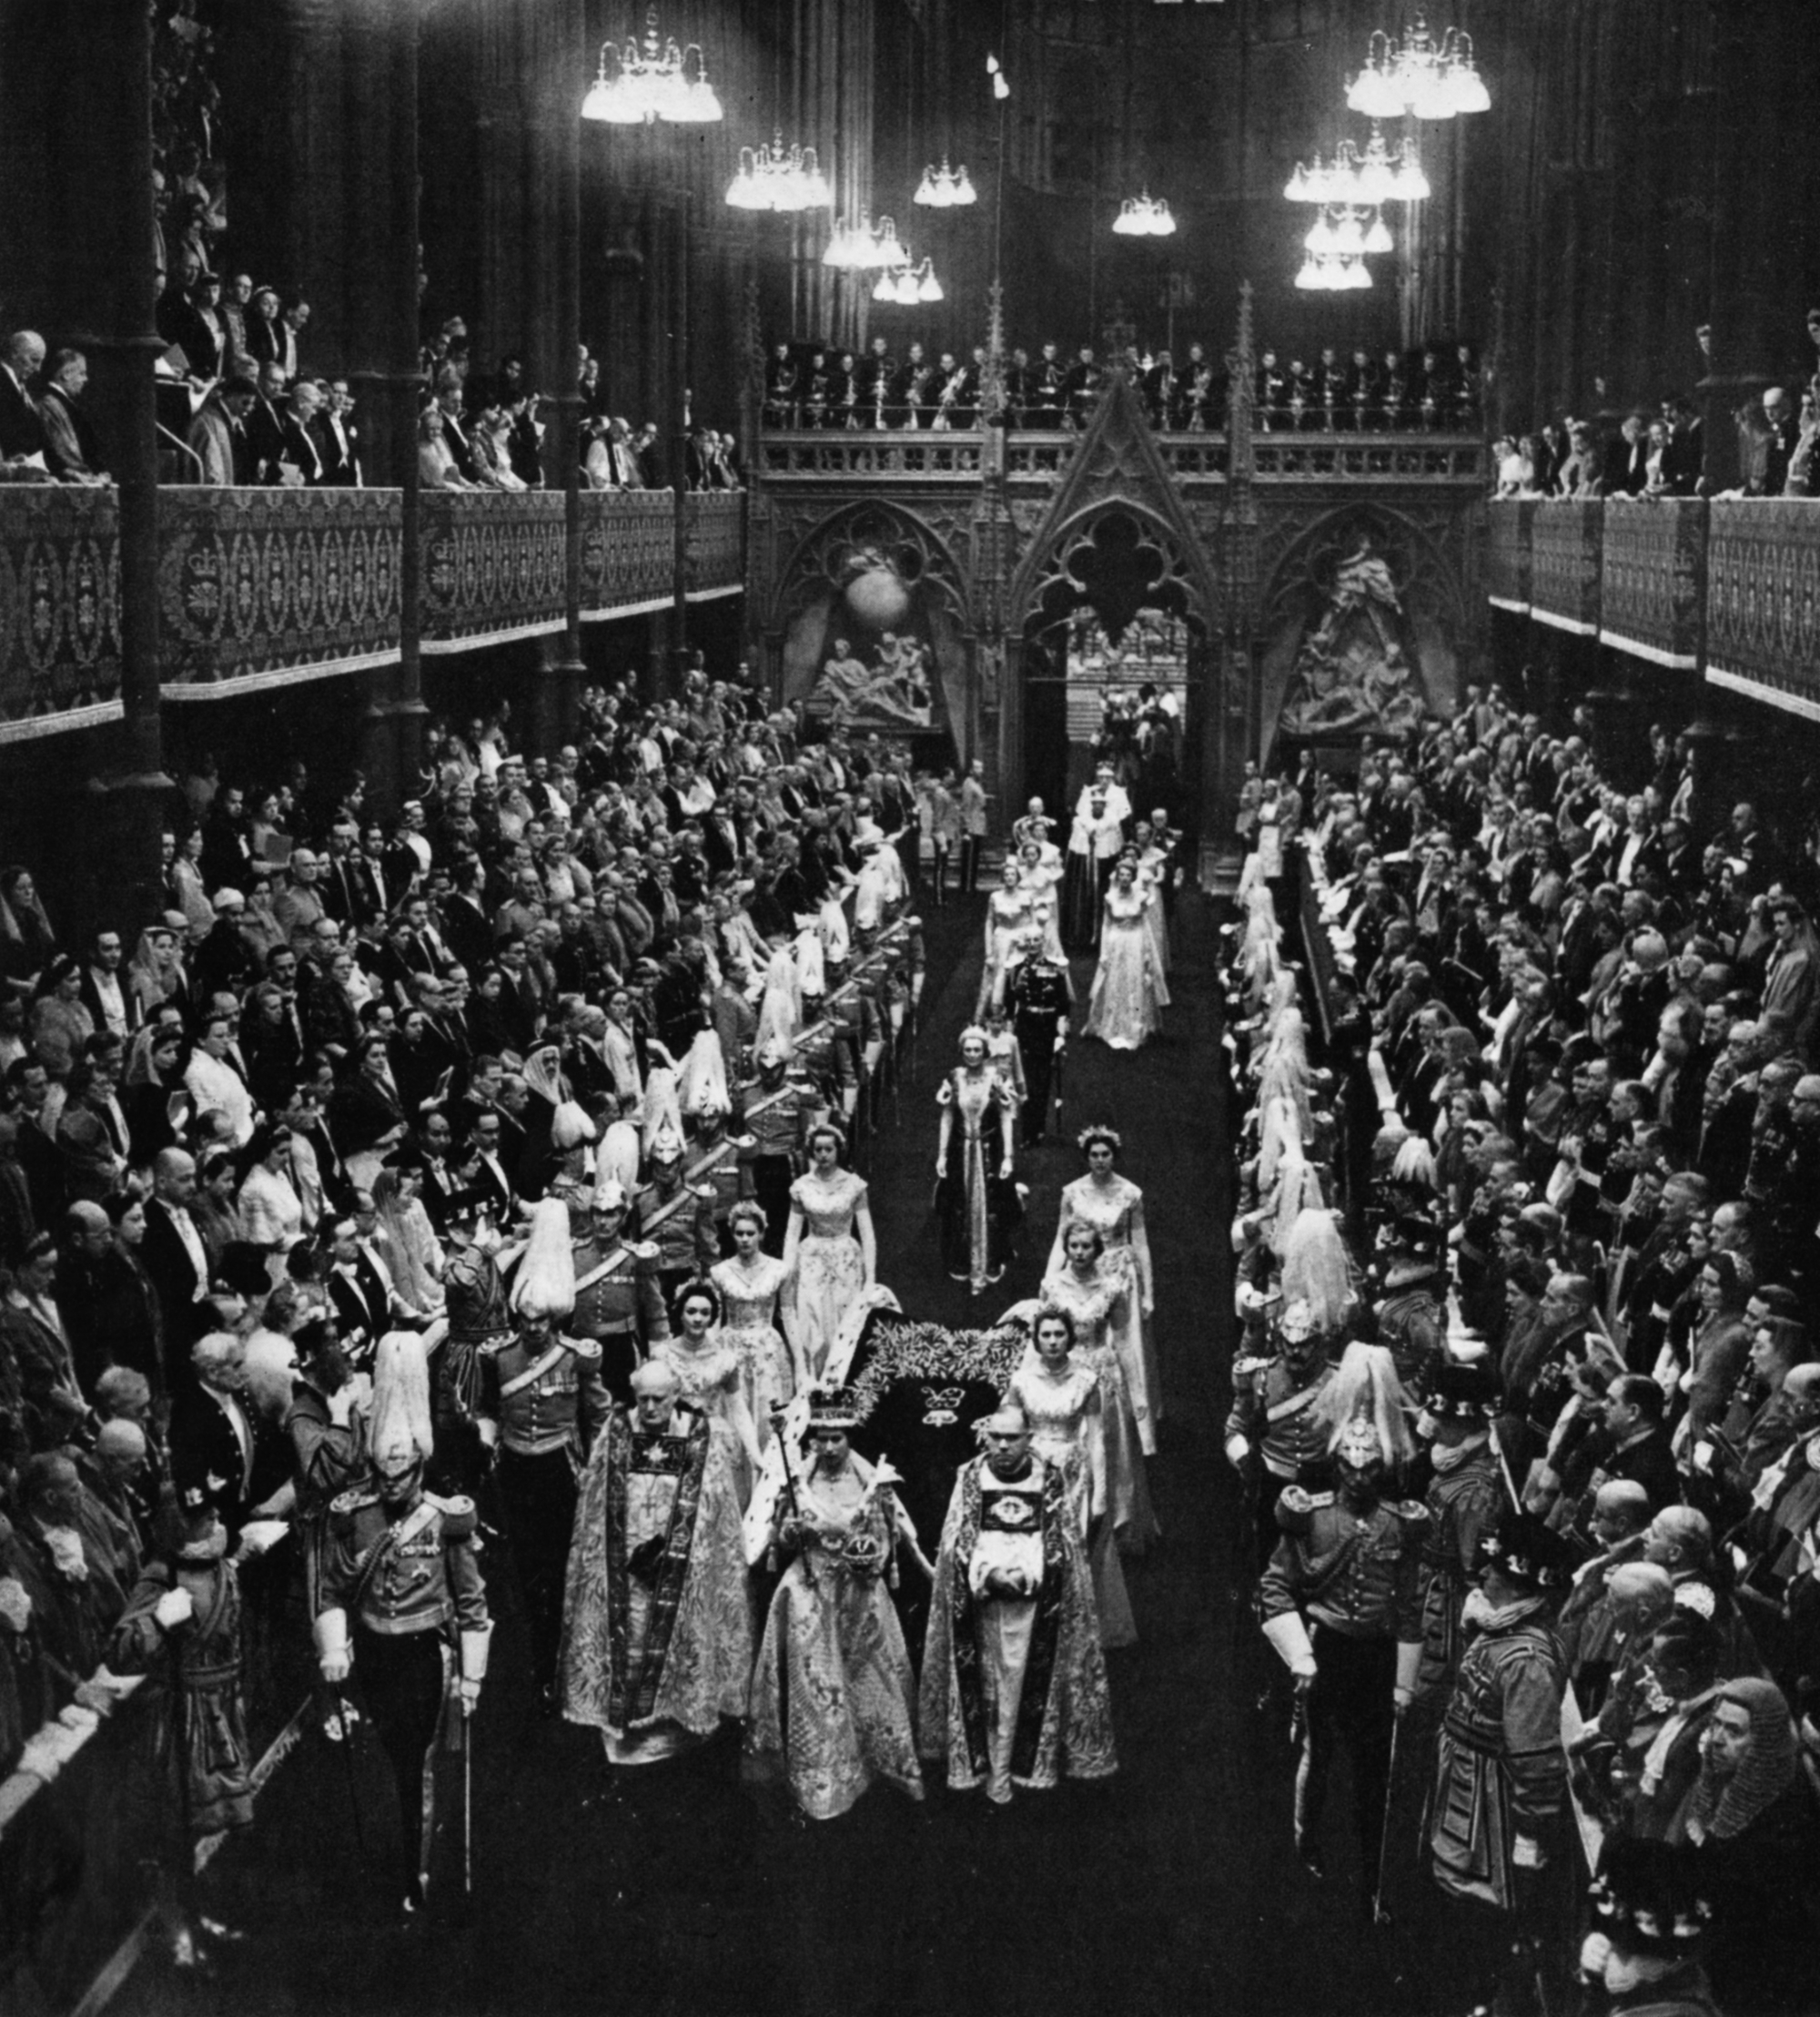 The newly crowned Queen Elizabeth II and her retinue parade down the aisle of Westminster Abbey